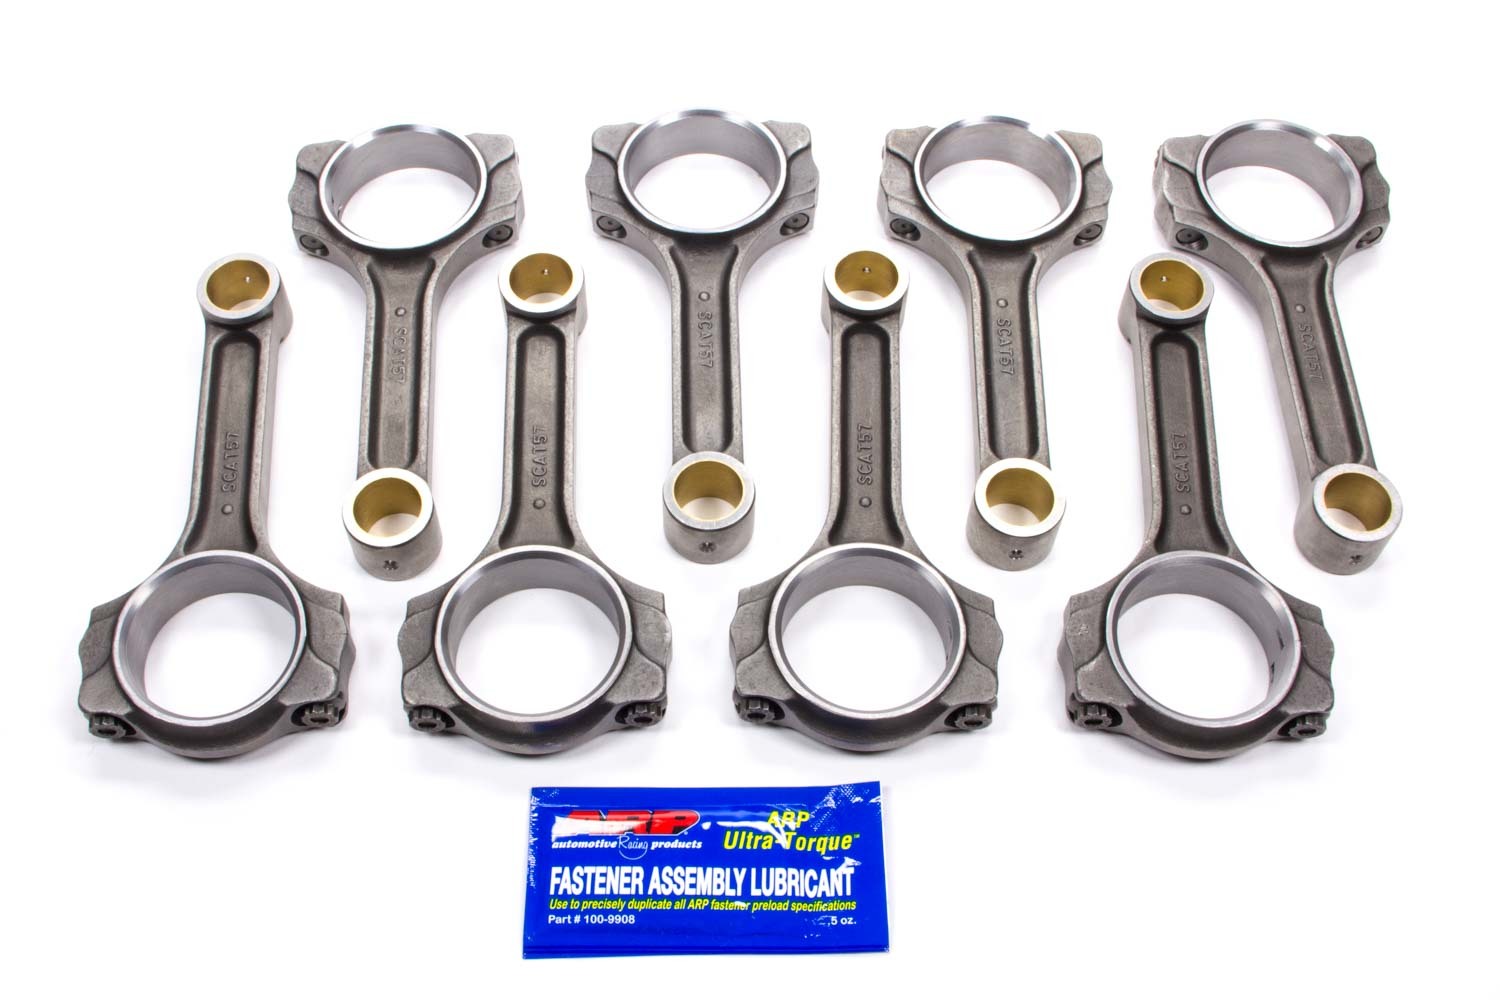 Scat 2-ICR6200-7/16 - Connecting Rod, Pro Comp, I Beam, 6.200 in Long, Bushed, 7/16 in Cap Screws, ARP8740, Forged Steel, Small Block Chevy, Set of 8